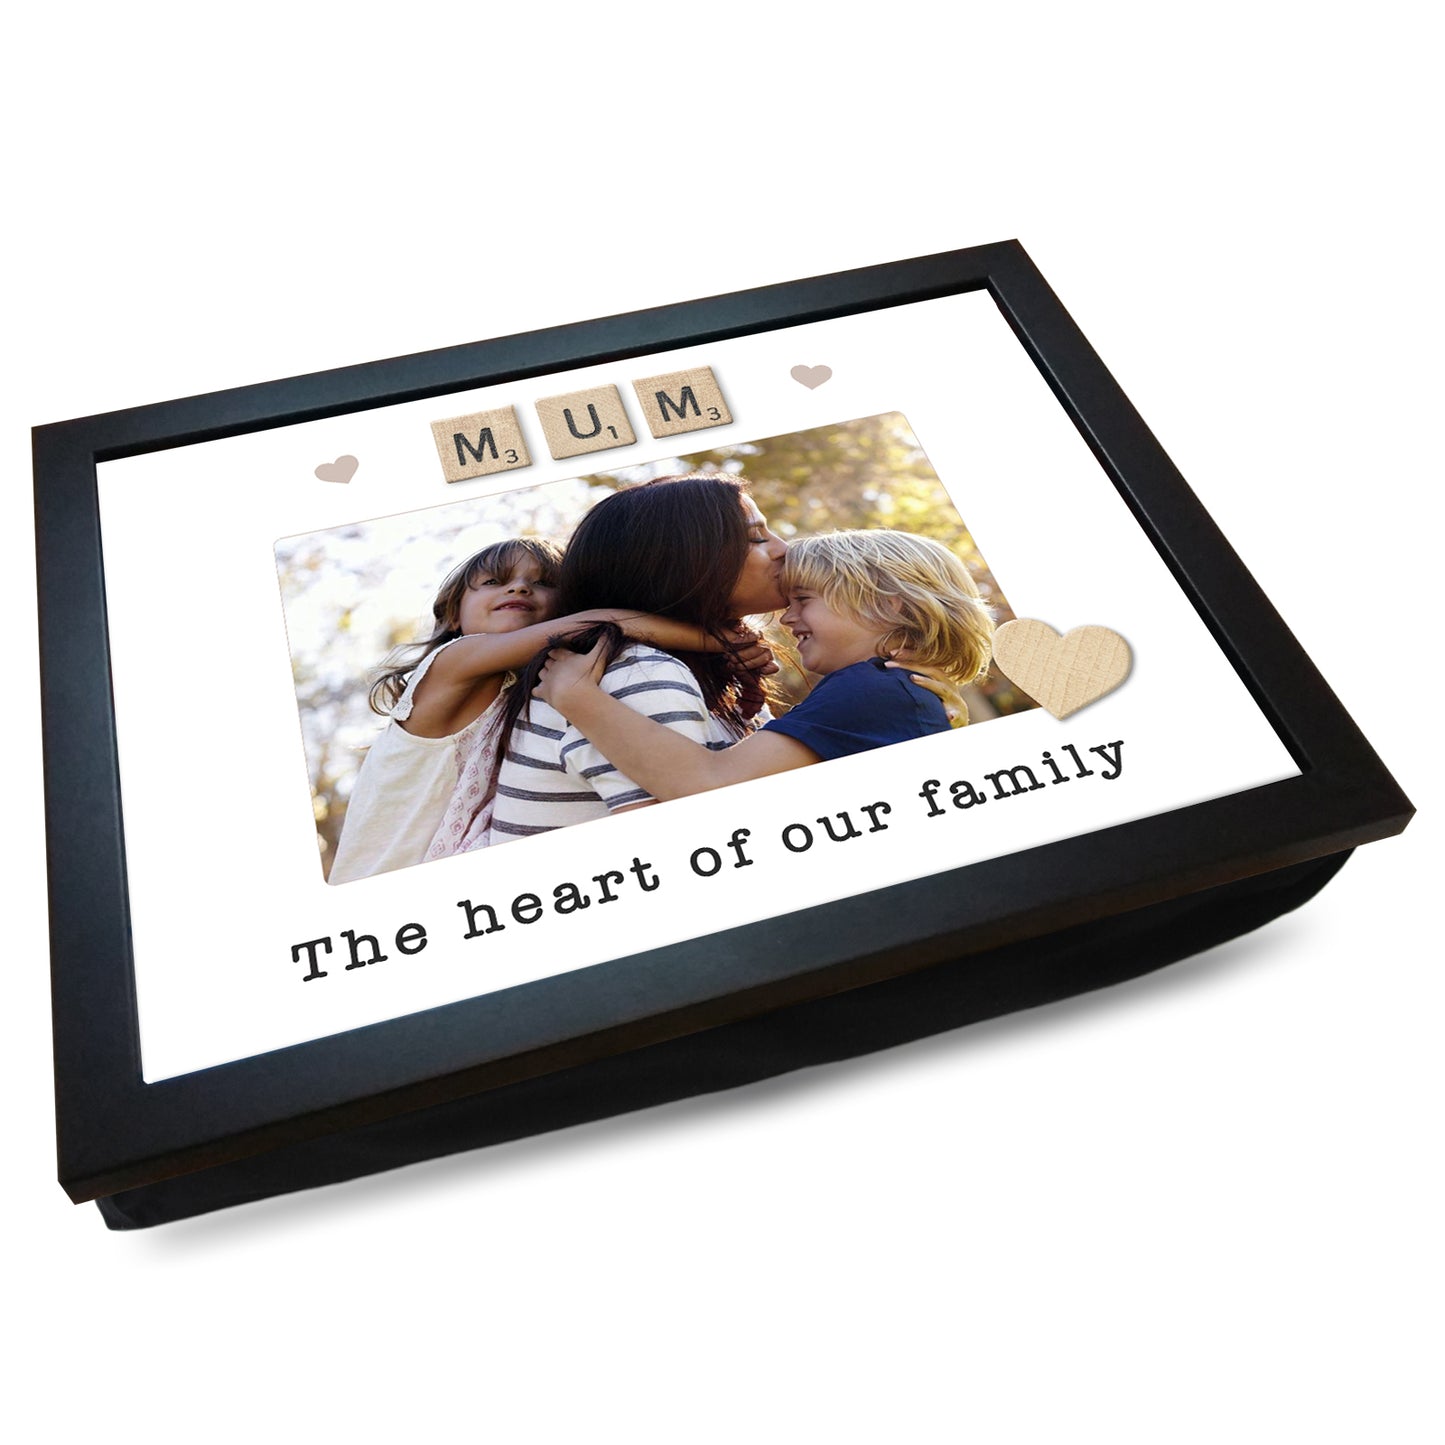 'MUM - The Heart of our Family' Personalised Photo Lap Tray